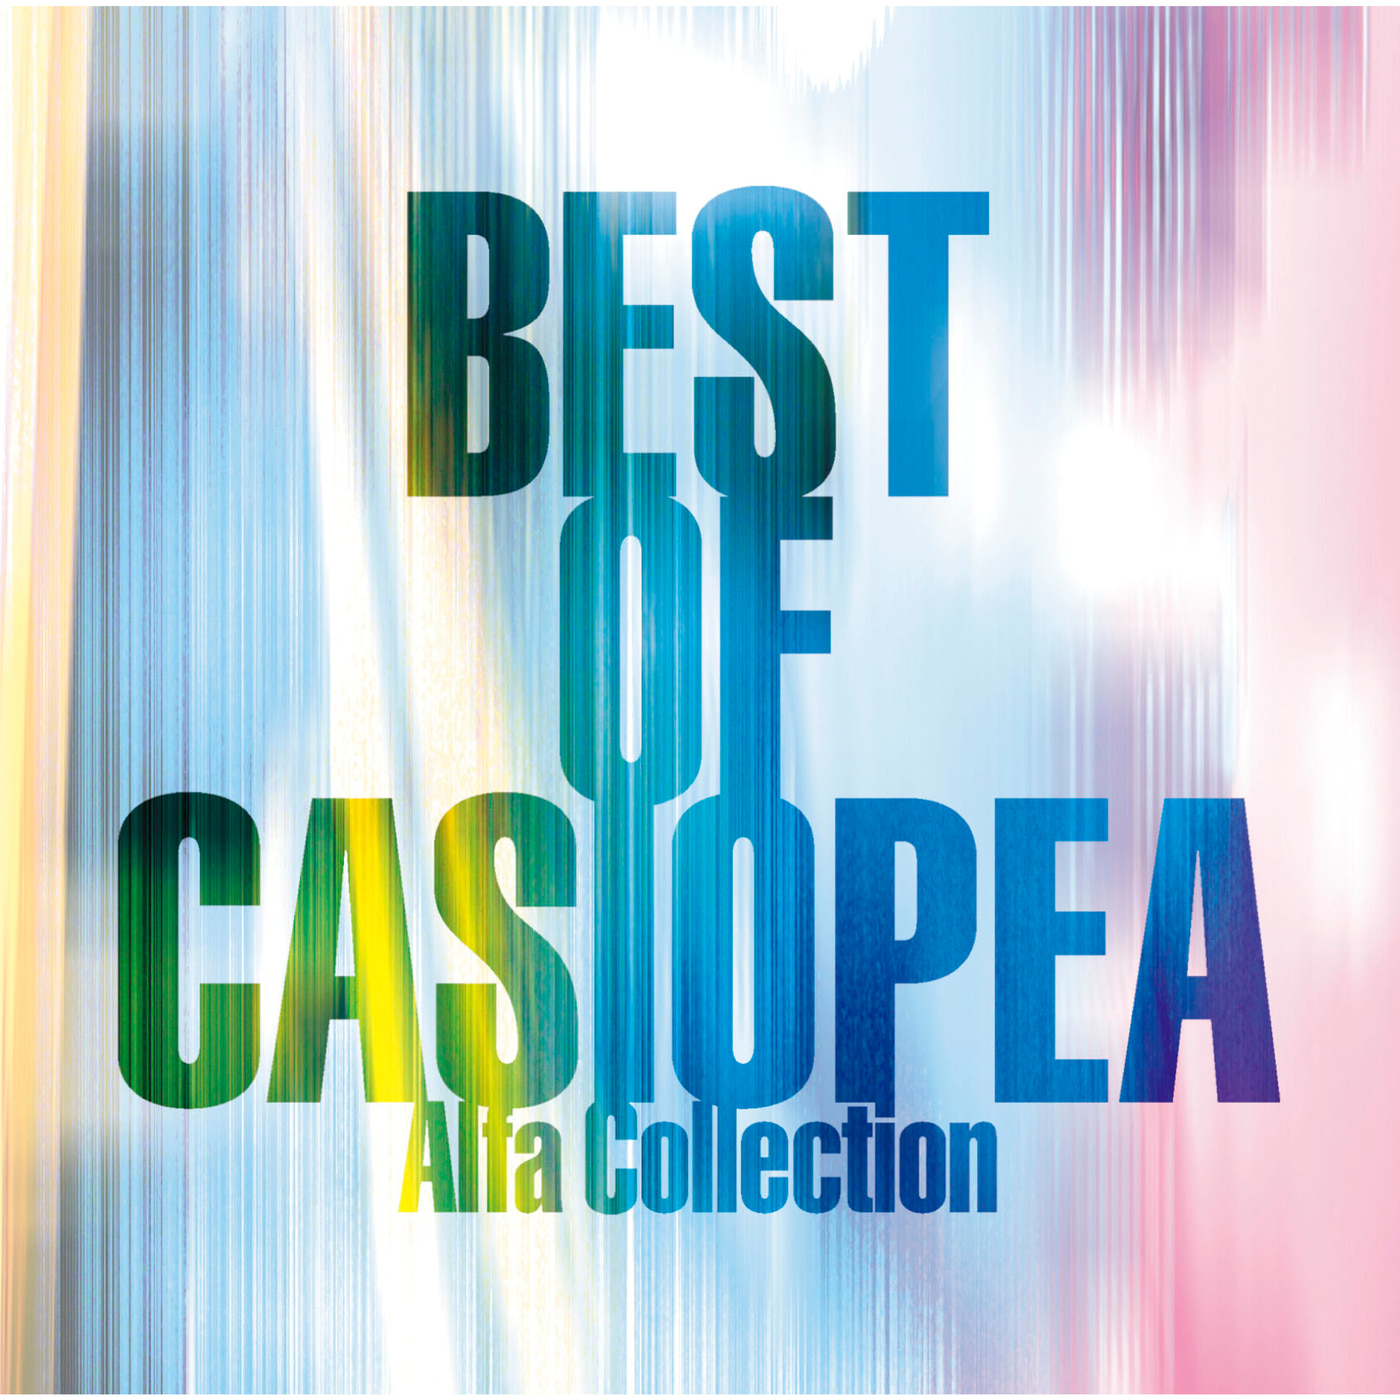 Casiopea-Voice From Others